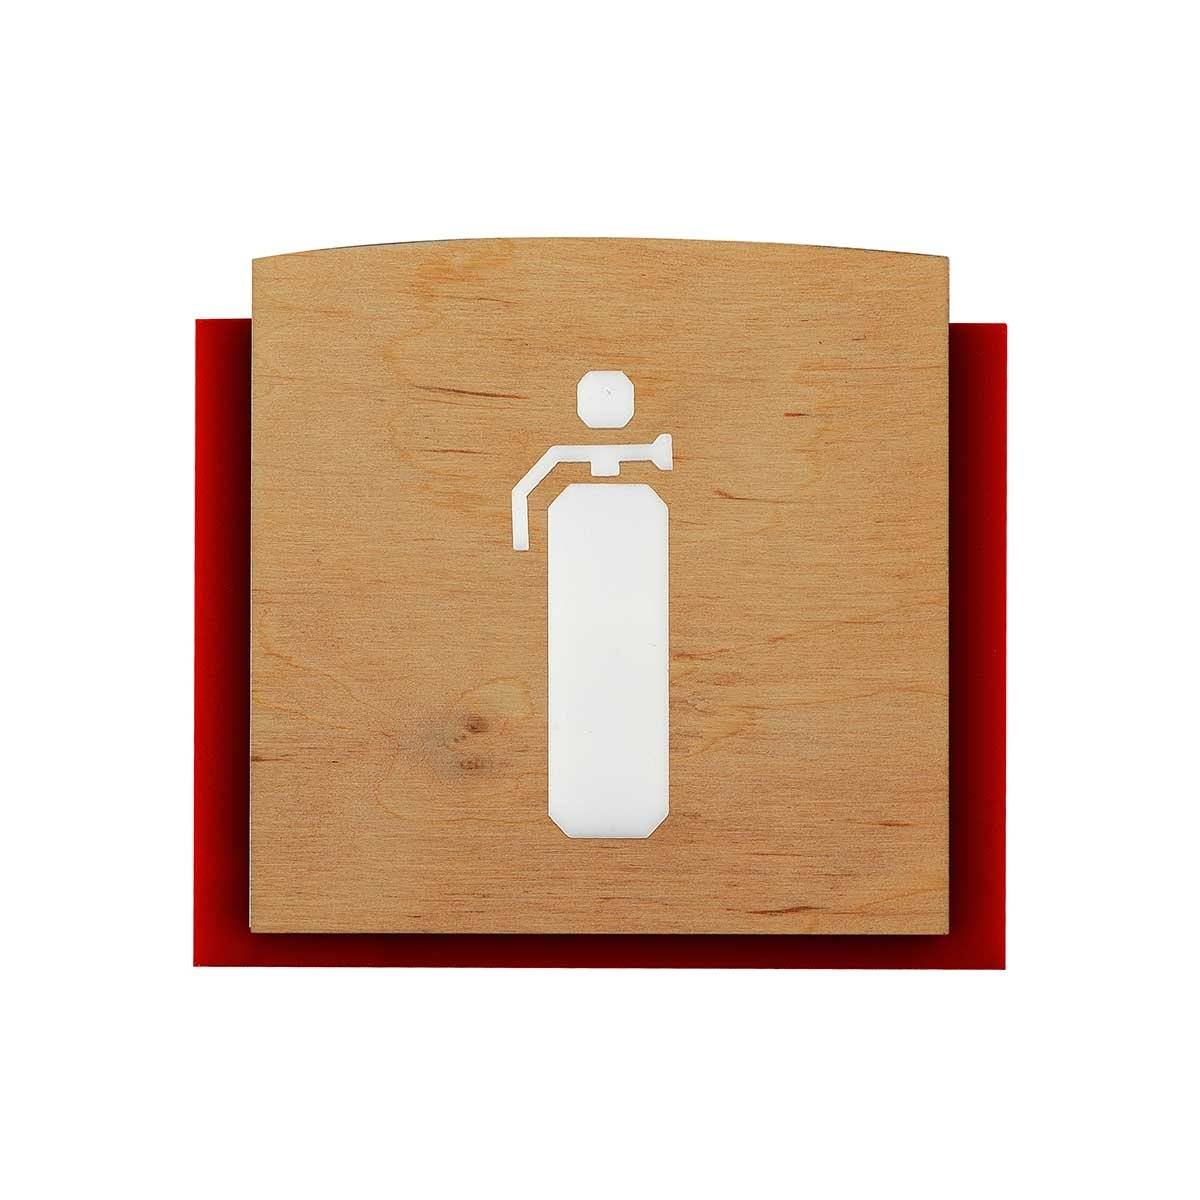 Wood Extinguisher Fire Safety Sign for Office Information signs Natural wood Bsign